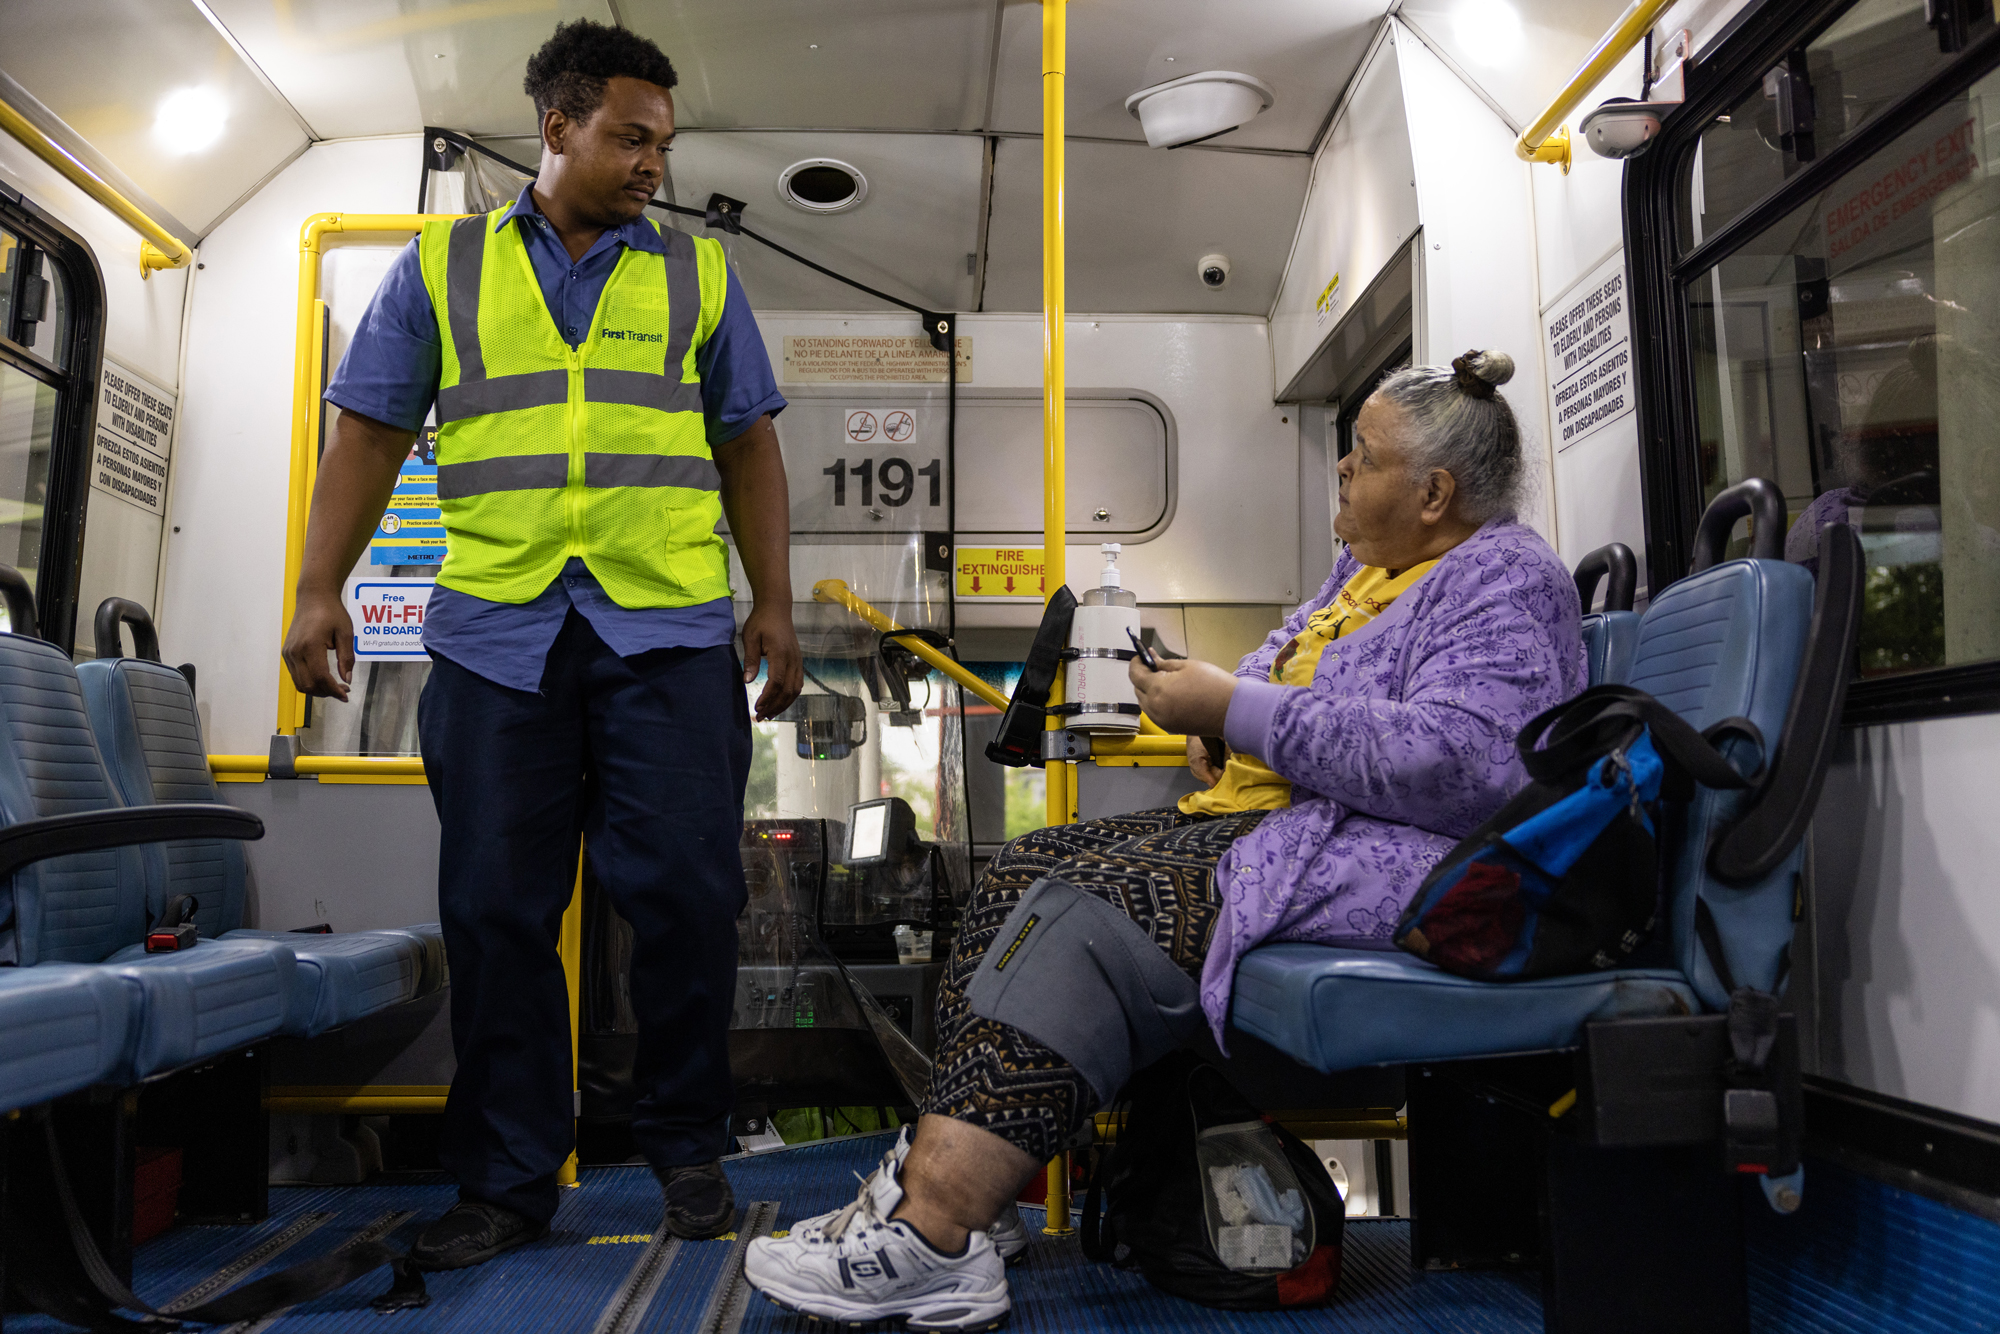 METROLift is a vital service for people with disabilities. But it leaves some riders waiting.